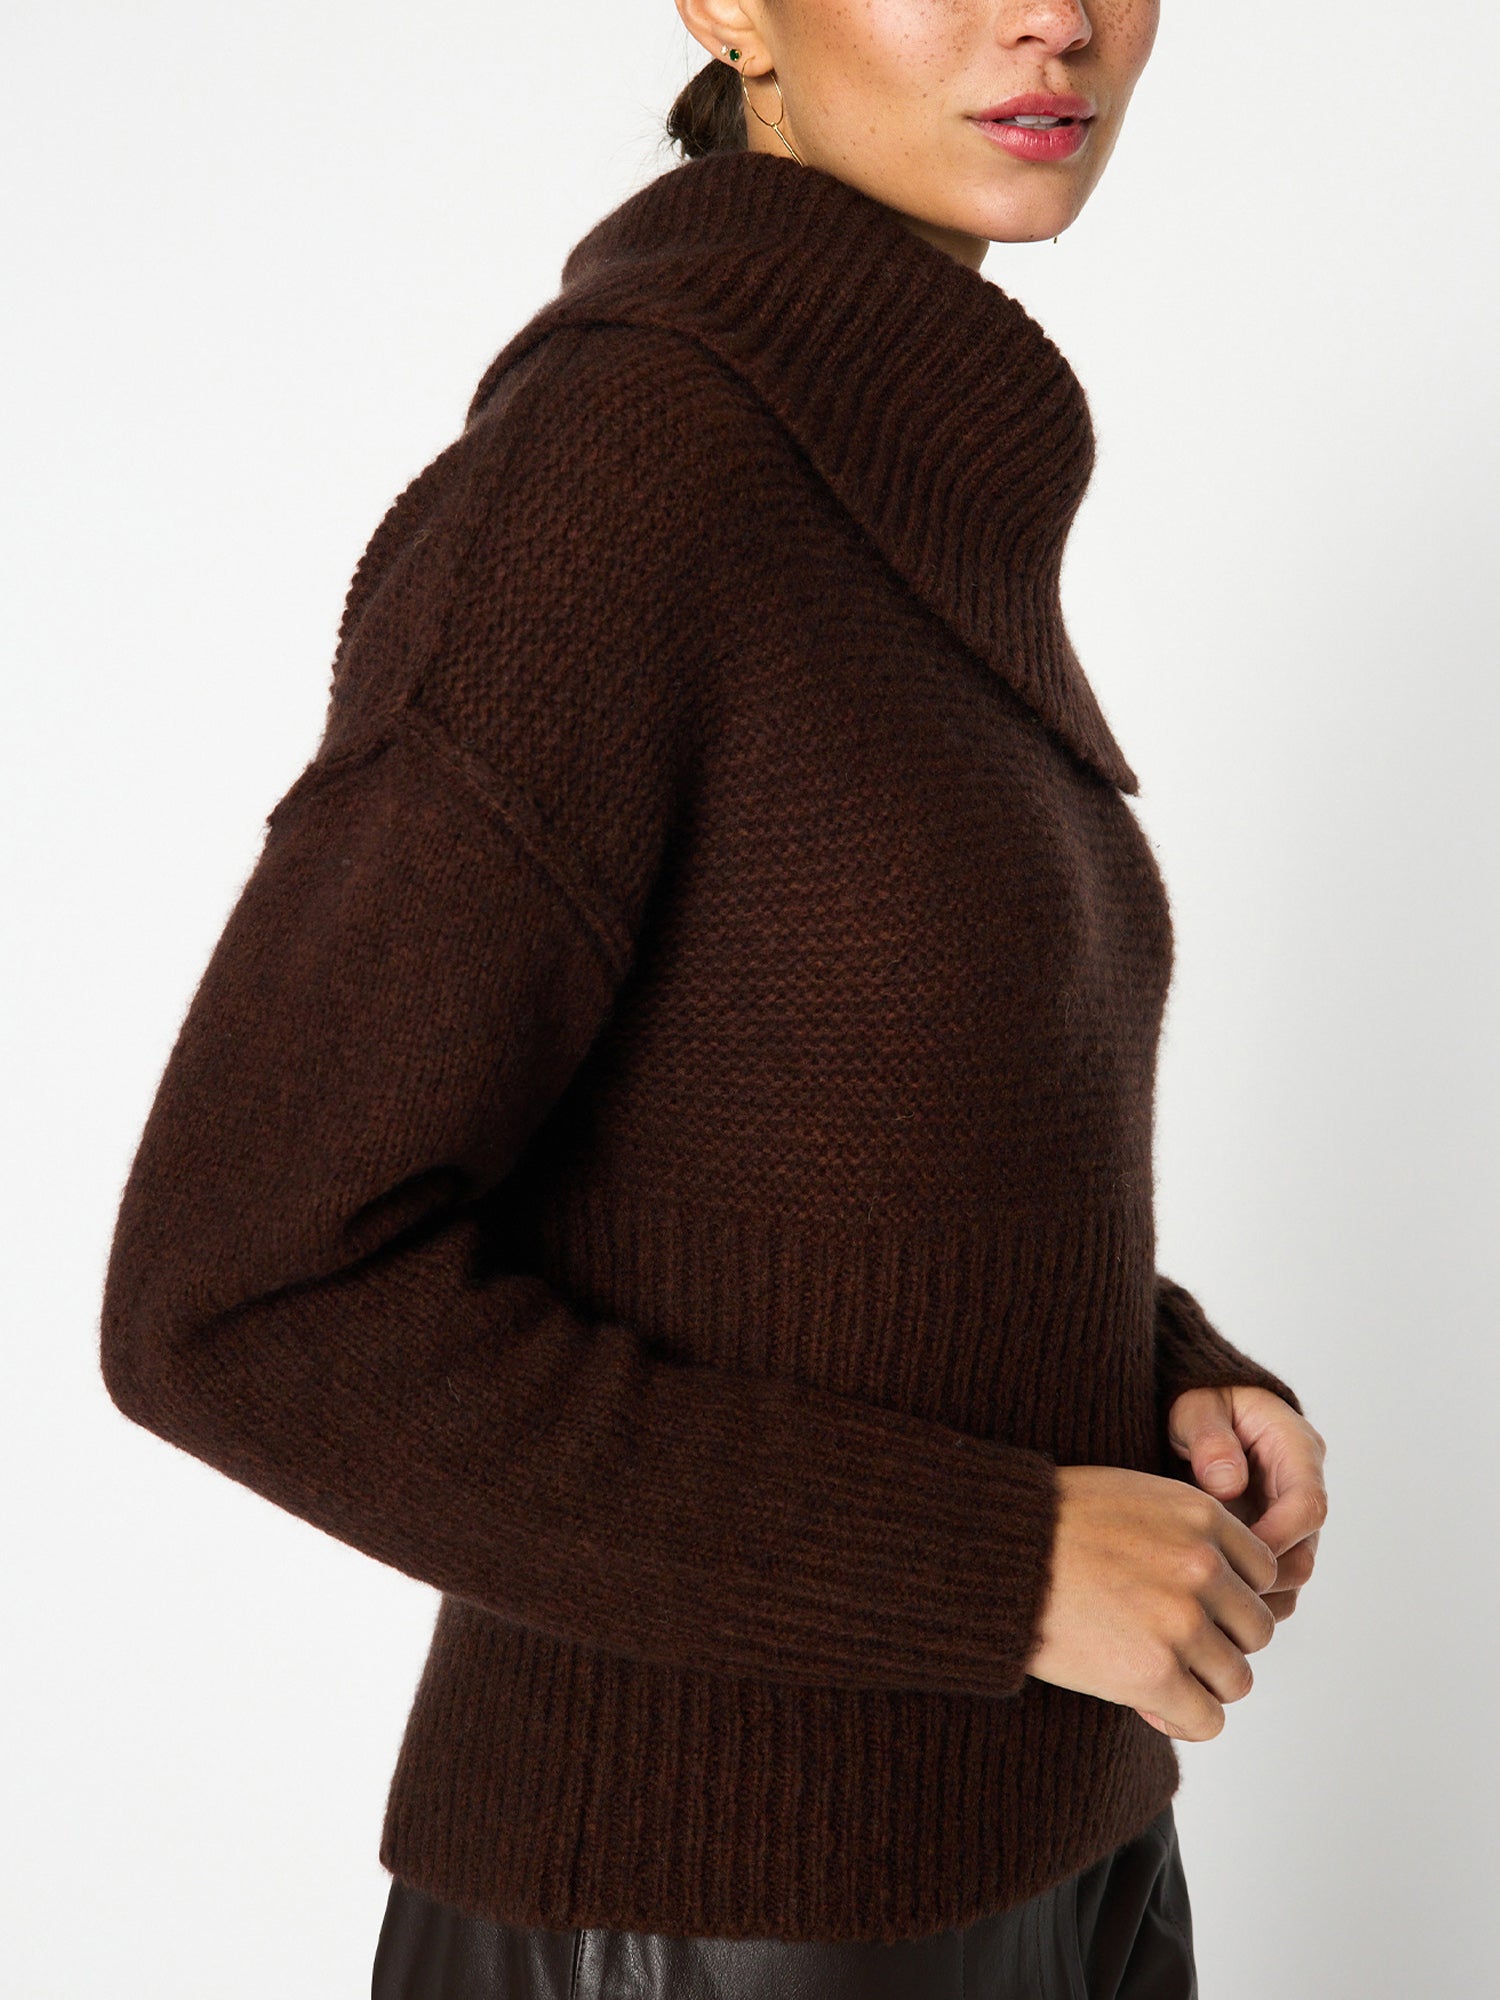 Elian overlap cowlneck wool cashmere brown sweater side view